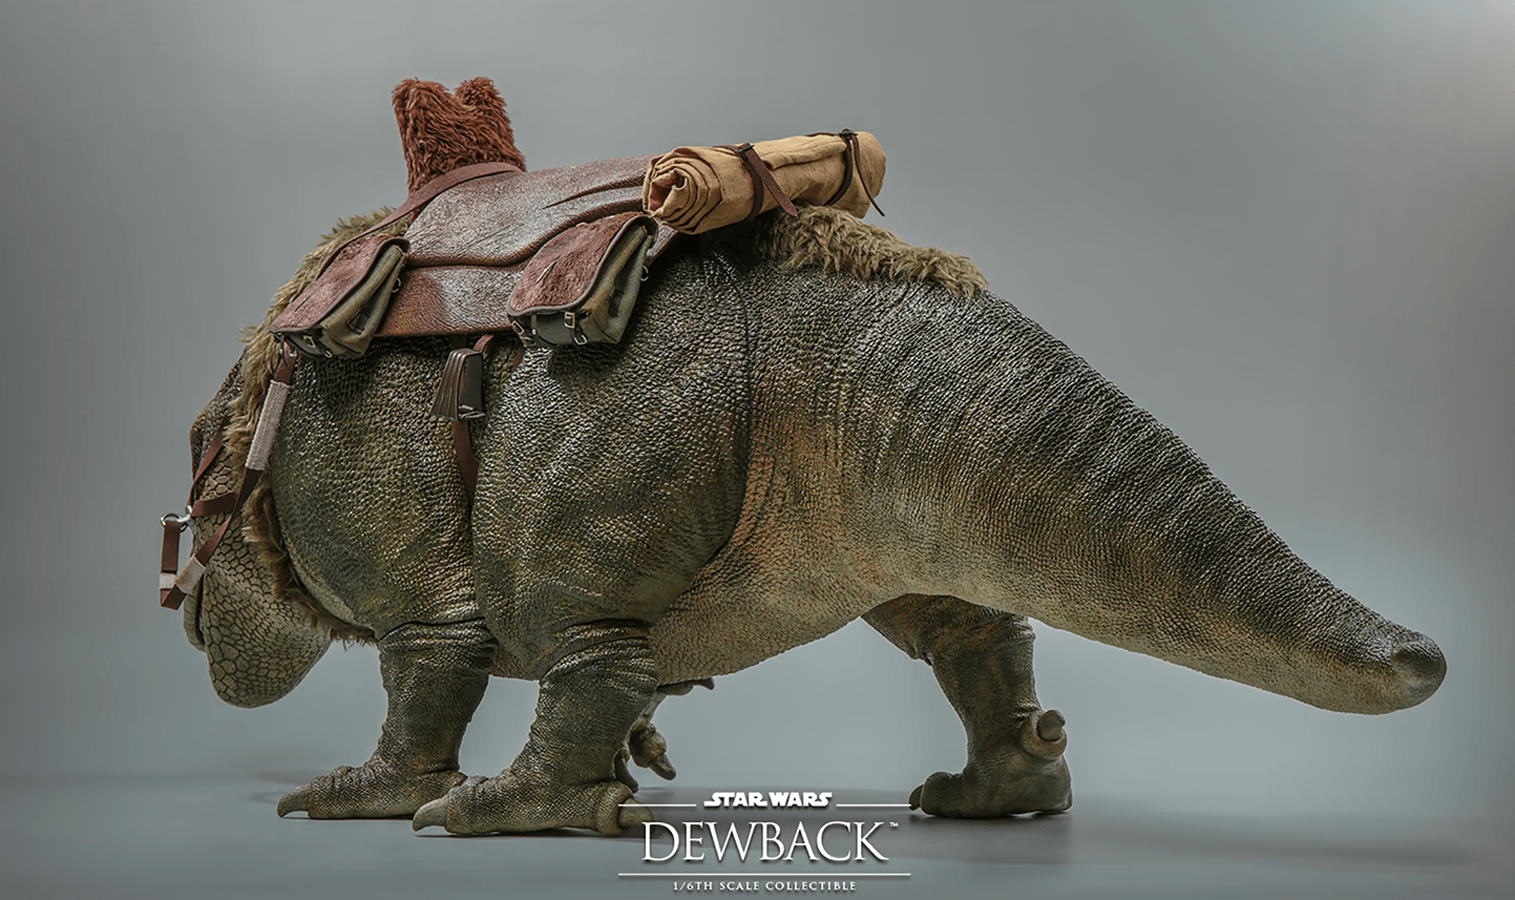 Star Wars - Dewback 1:6 Scale Collectable Figure Action figures by Hot Toys | Titan Pop Culture